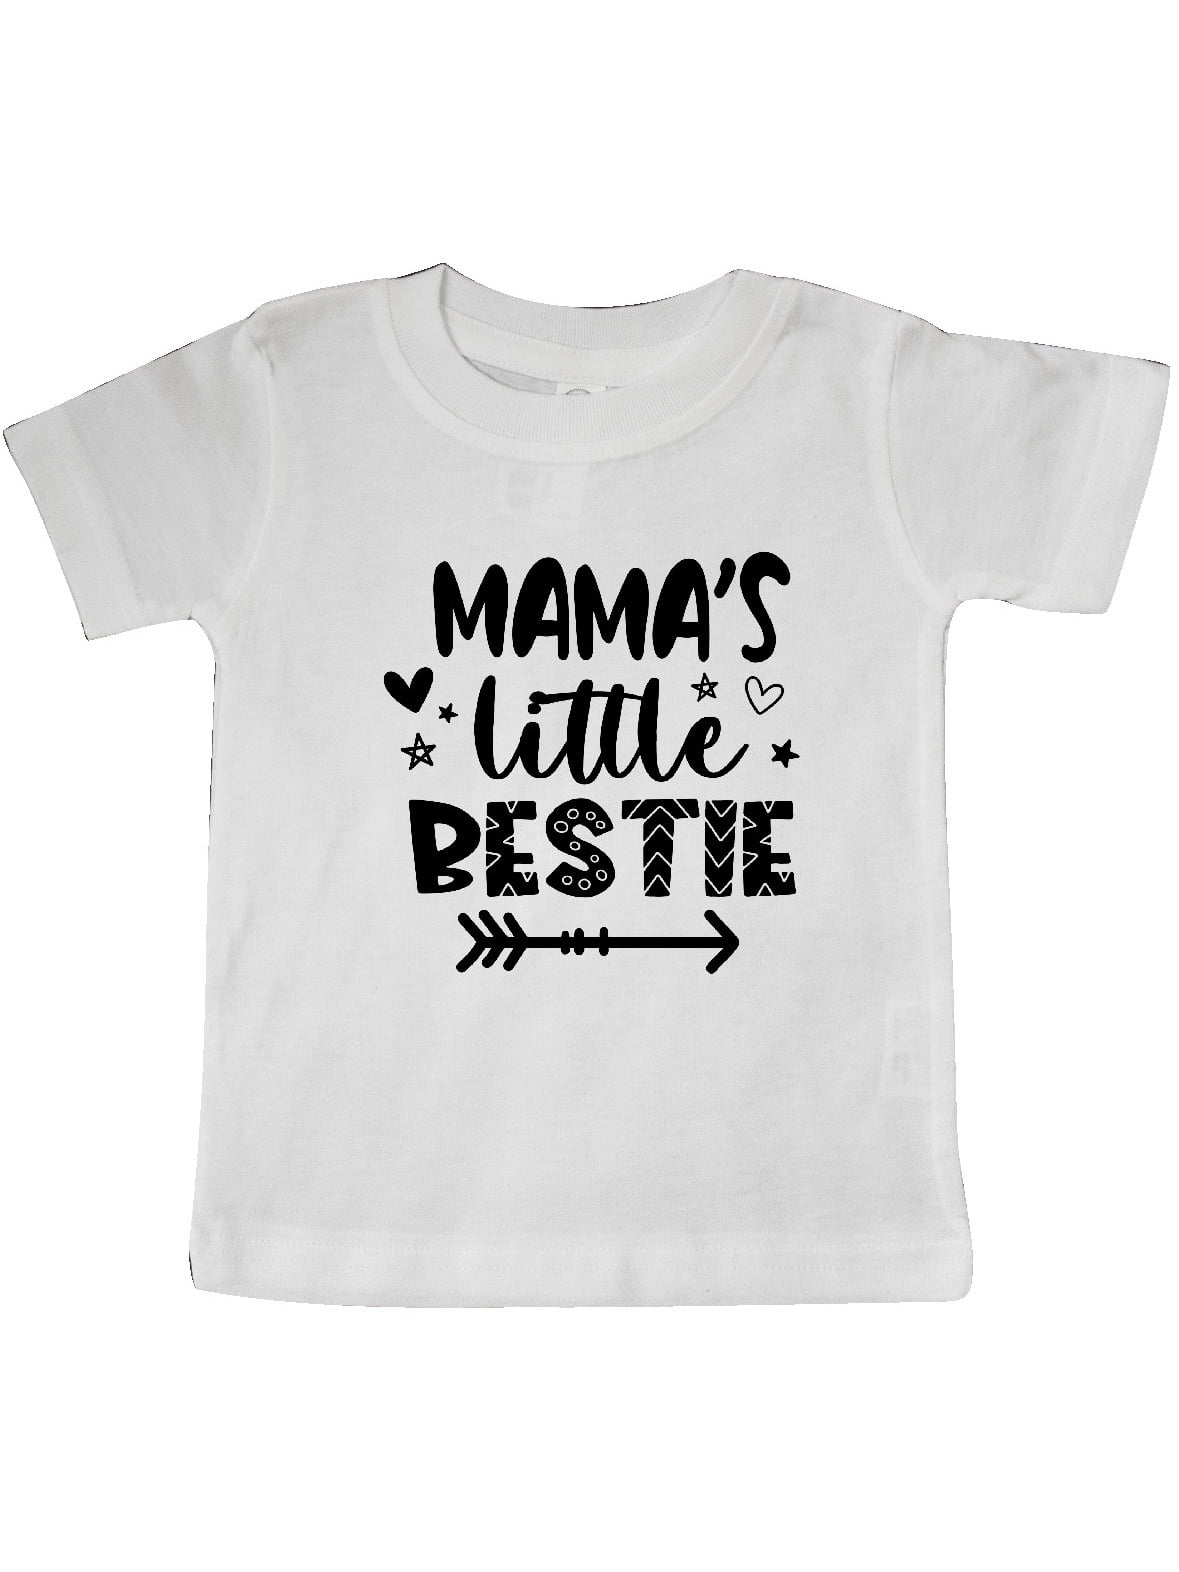 Mama's Little Bestie with Arrow and Hearts Baby T-Shirt - Walmart.com ...